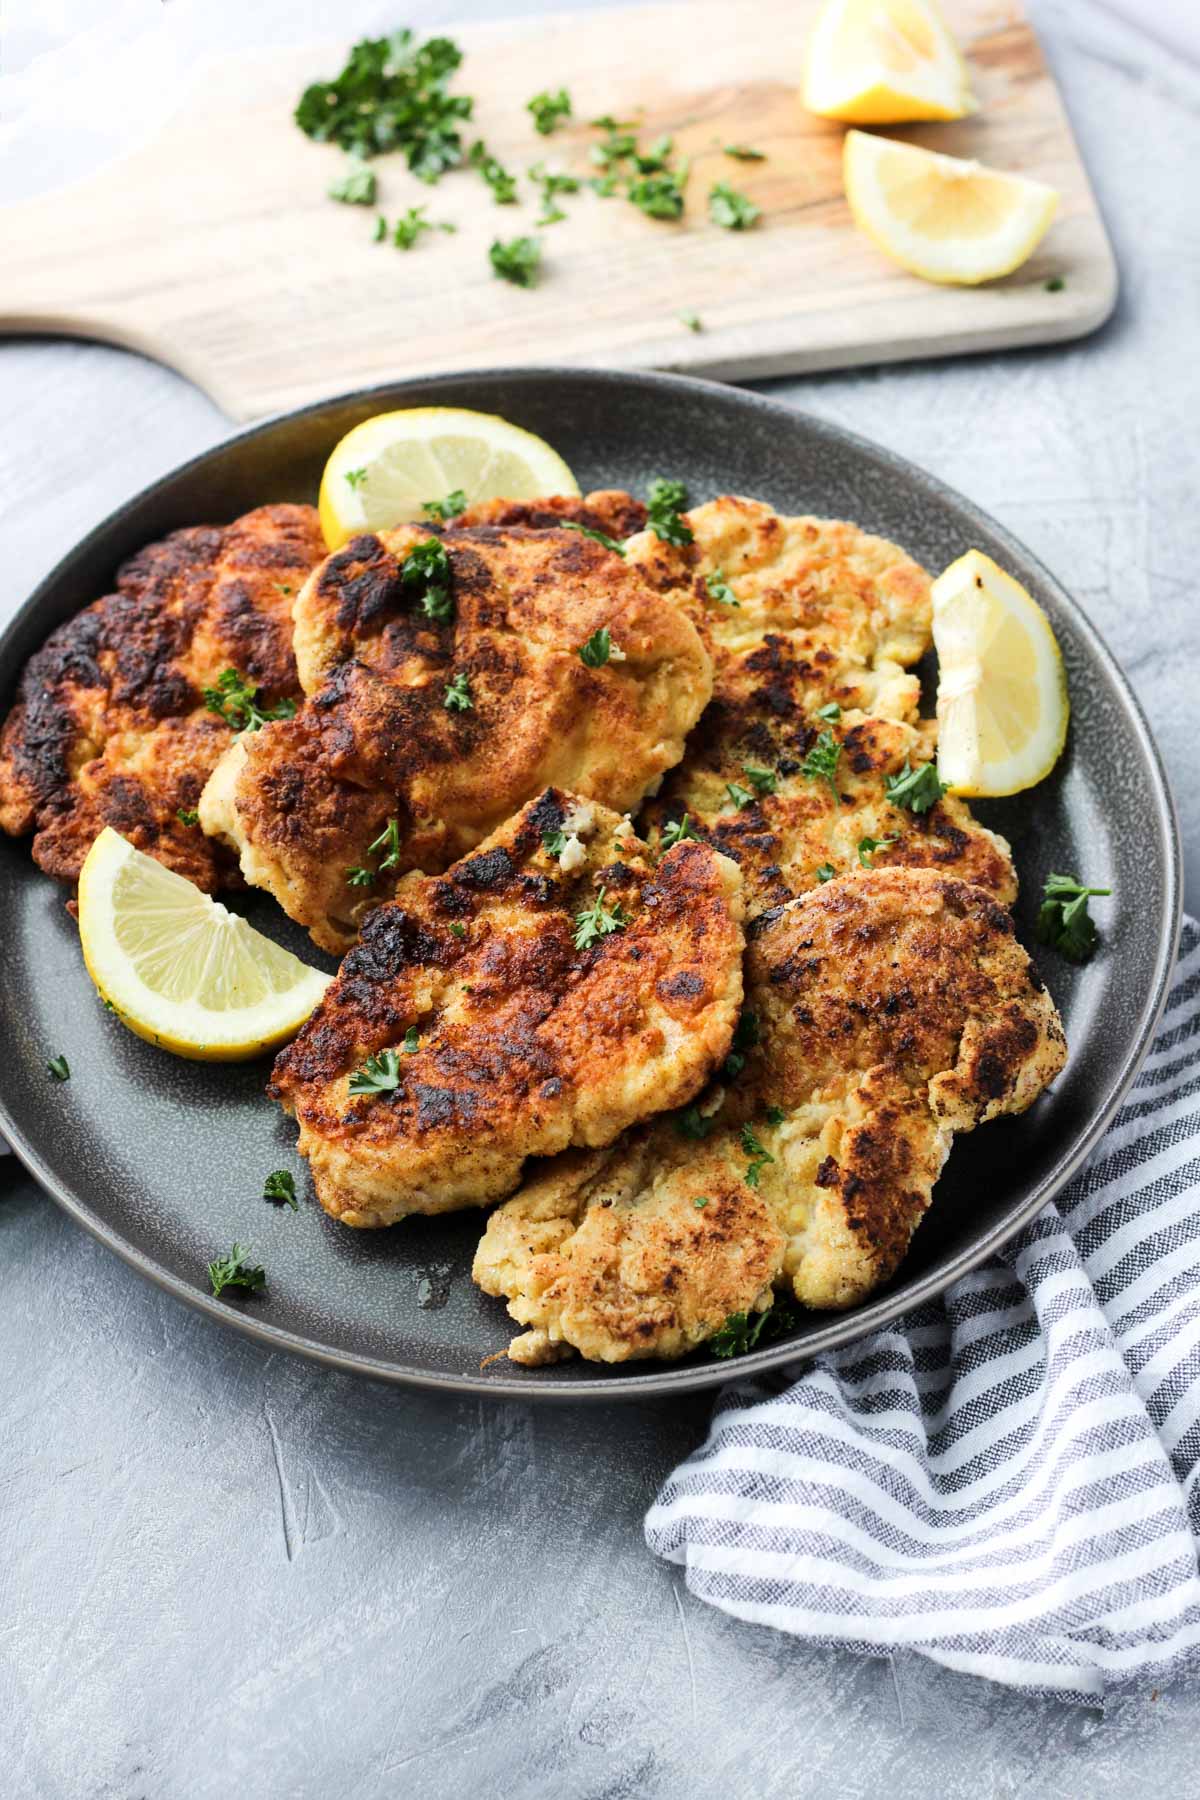 Plate of chicken cutlets with lemon slices and fresh parsley.